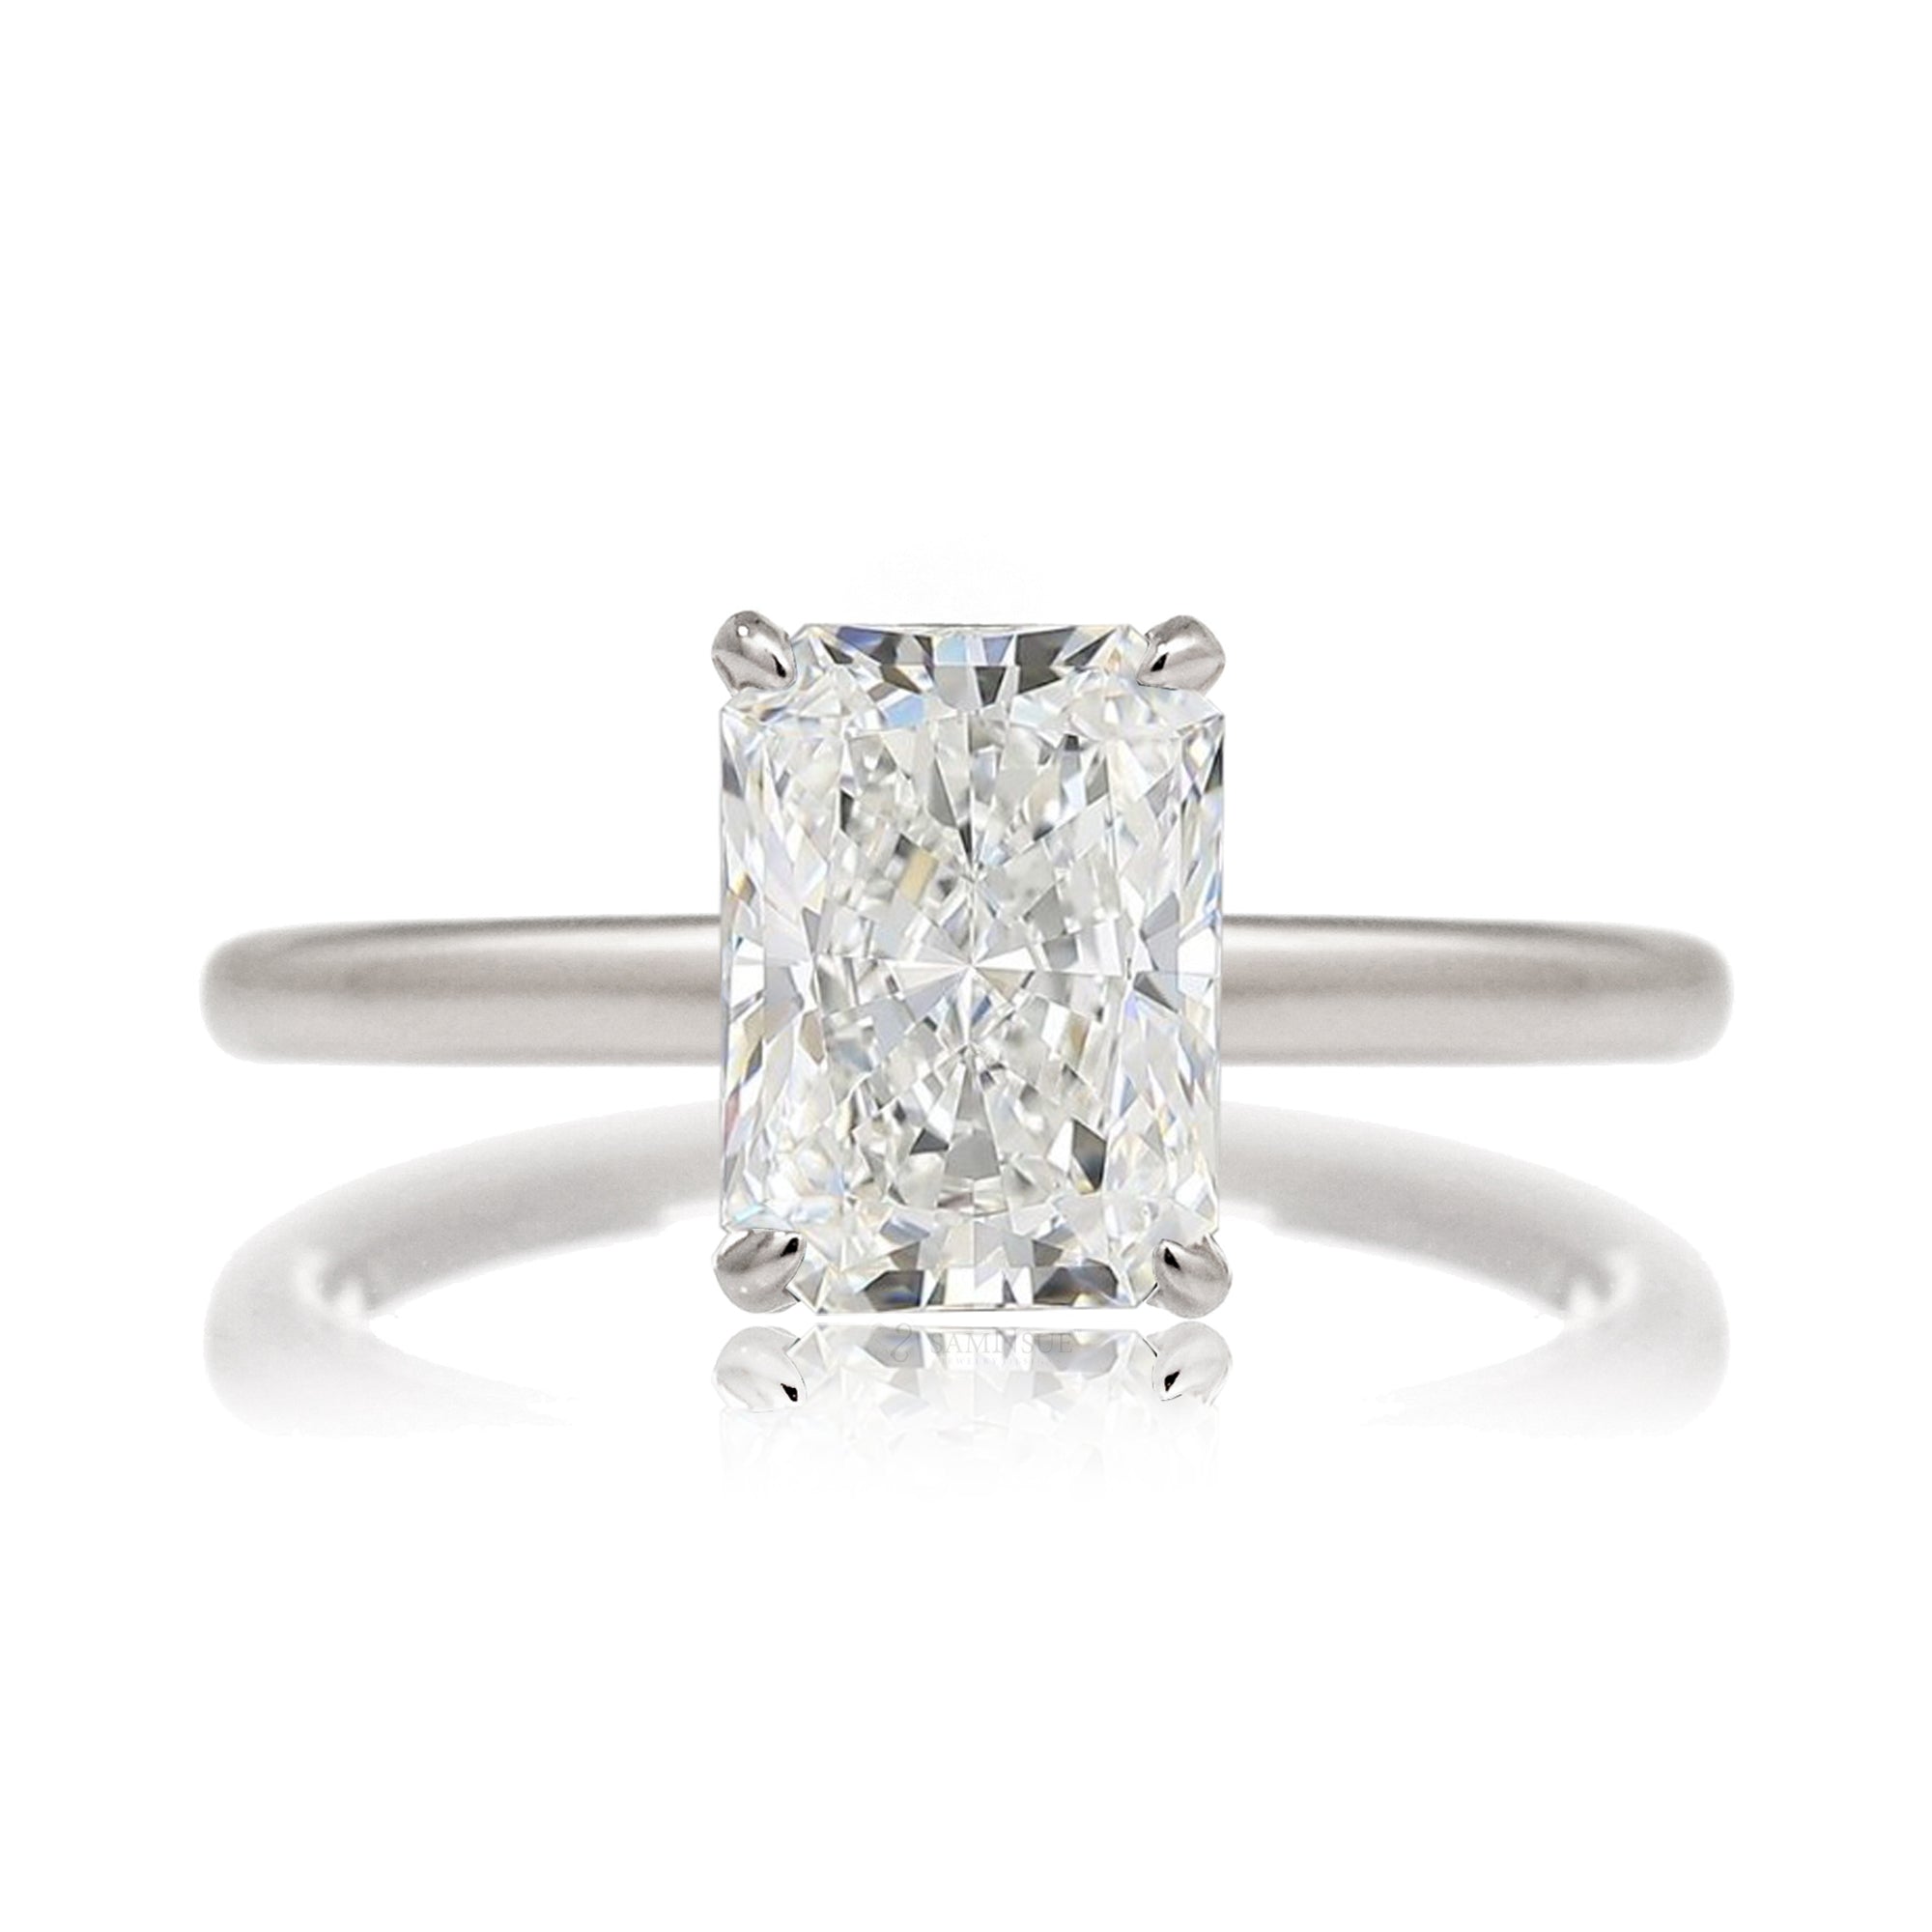 Radiant cut solitaire engagement ring diamond hidden halo solid band in white gold